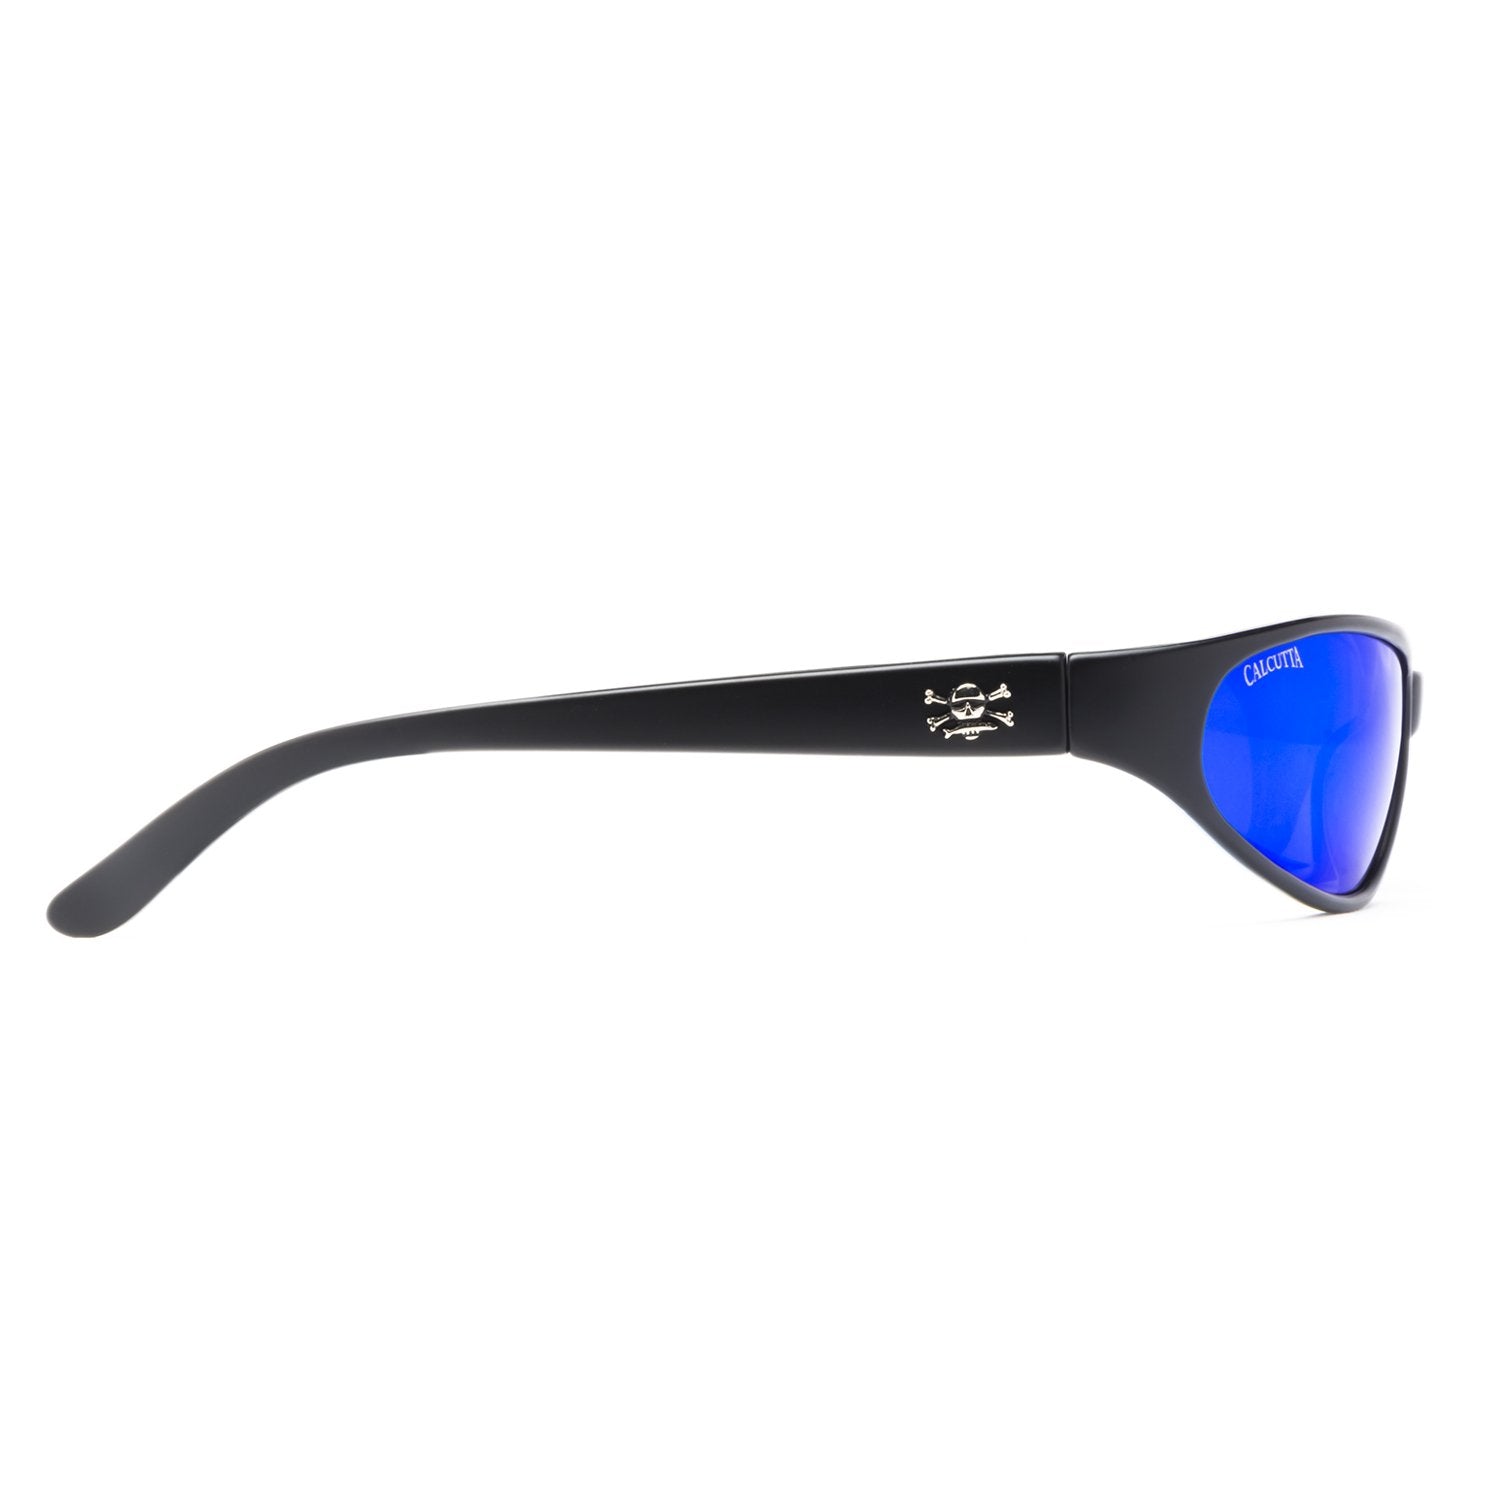 High Quality Polarized Designer Sunglasses Store For Men And Women Classic  Outdoor Style From Luckyshop668, $41.46